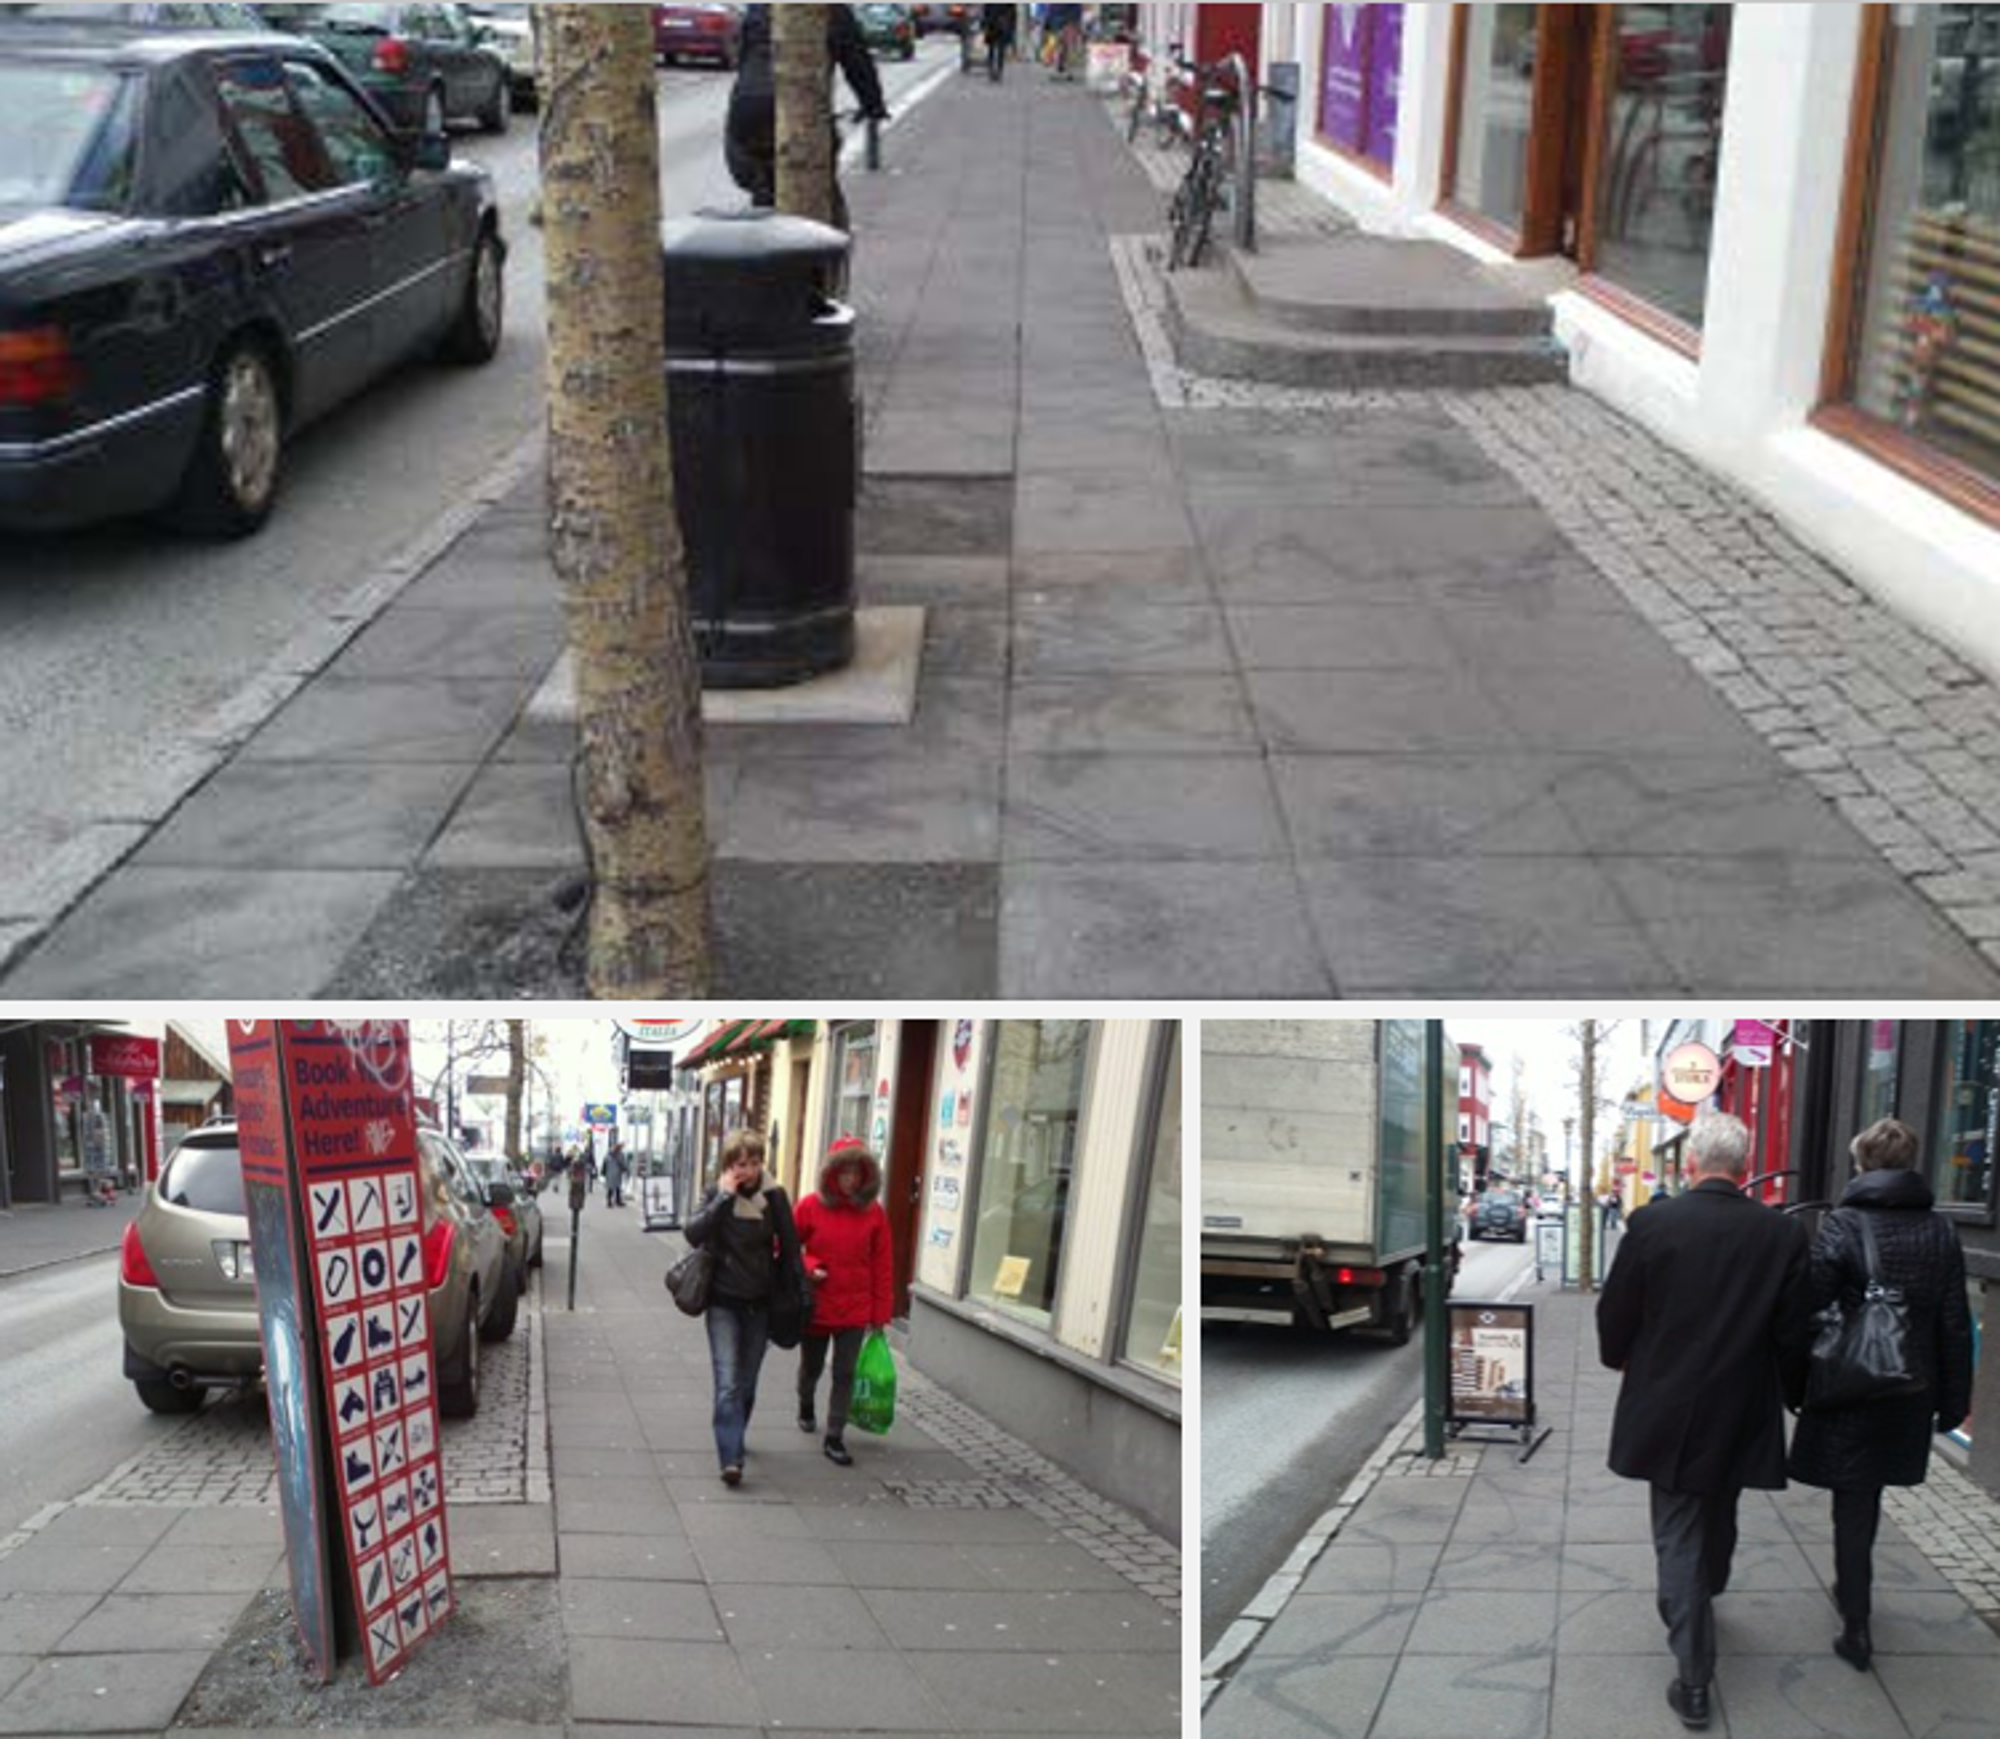 image consists of three small pictures featuring pedestrian pathway and people walking in pair